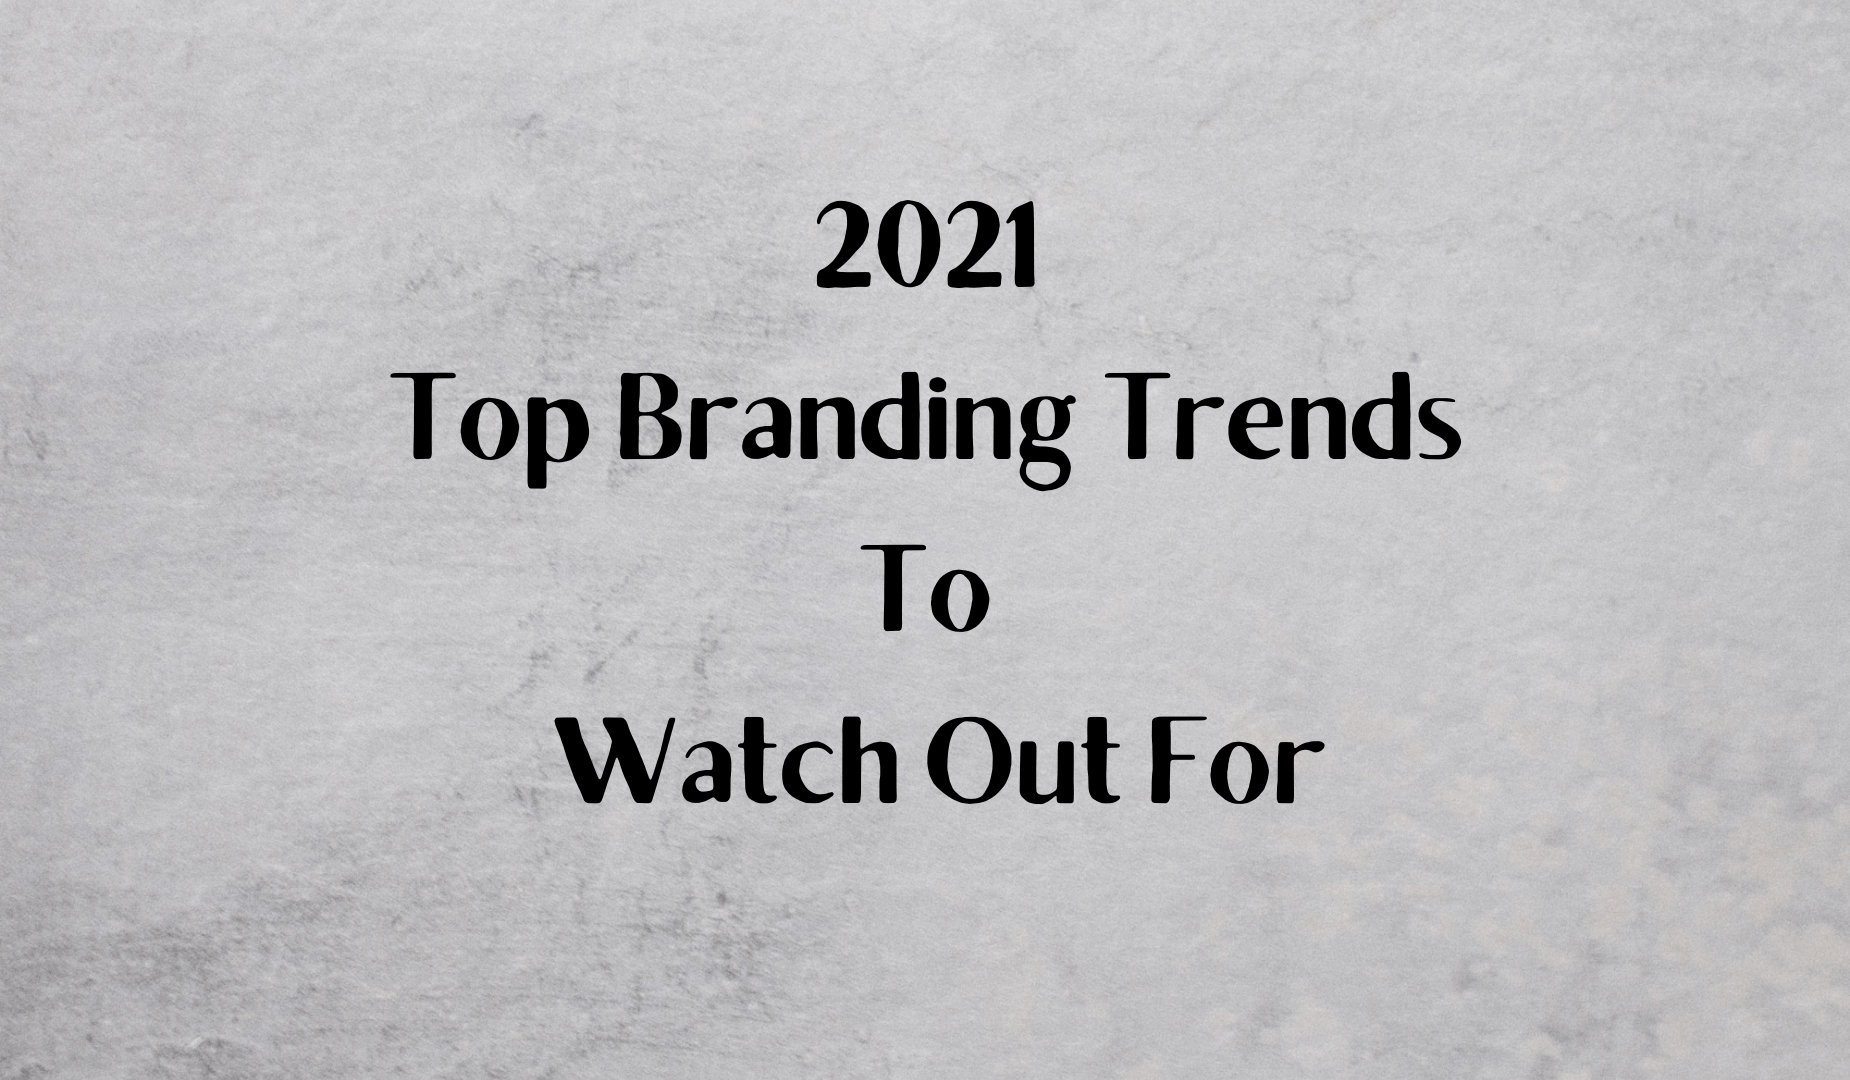 2021 Top Branding Trends to Watch Out For